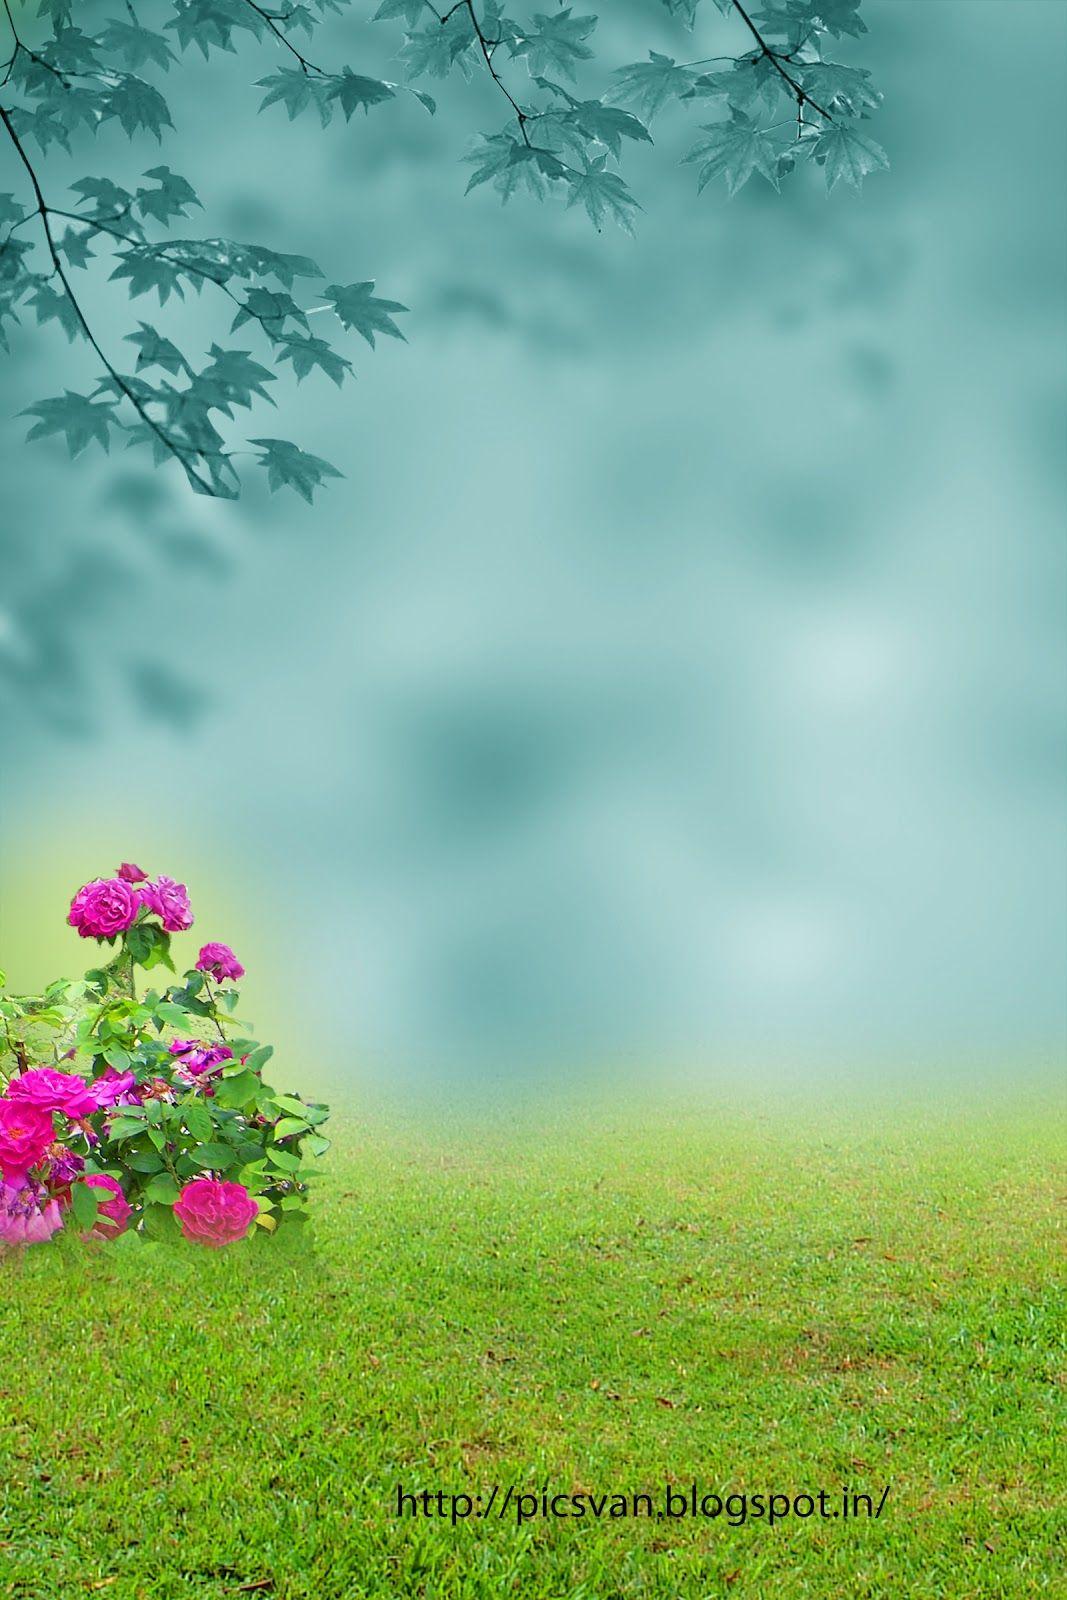 hd background images for photoshop free download